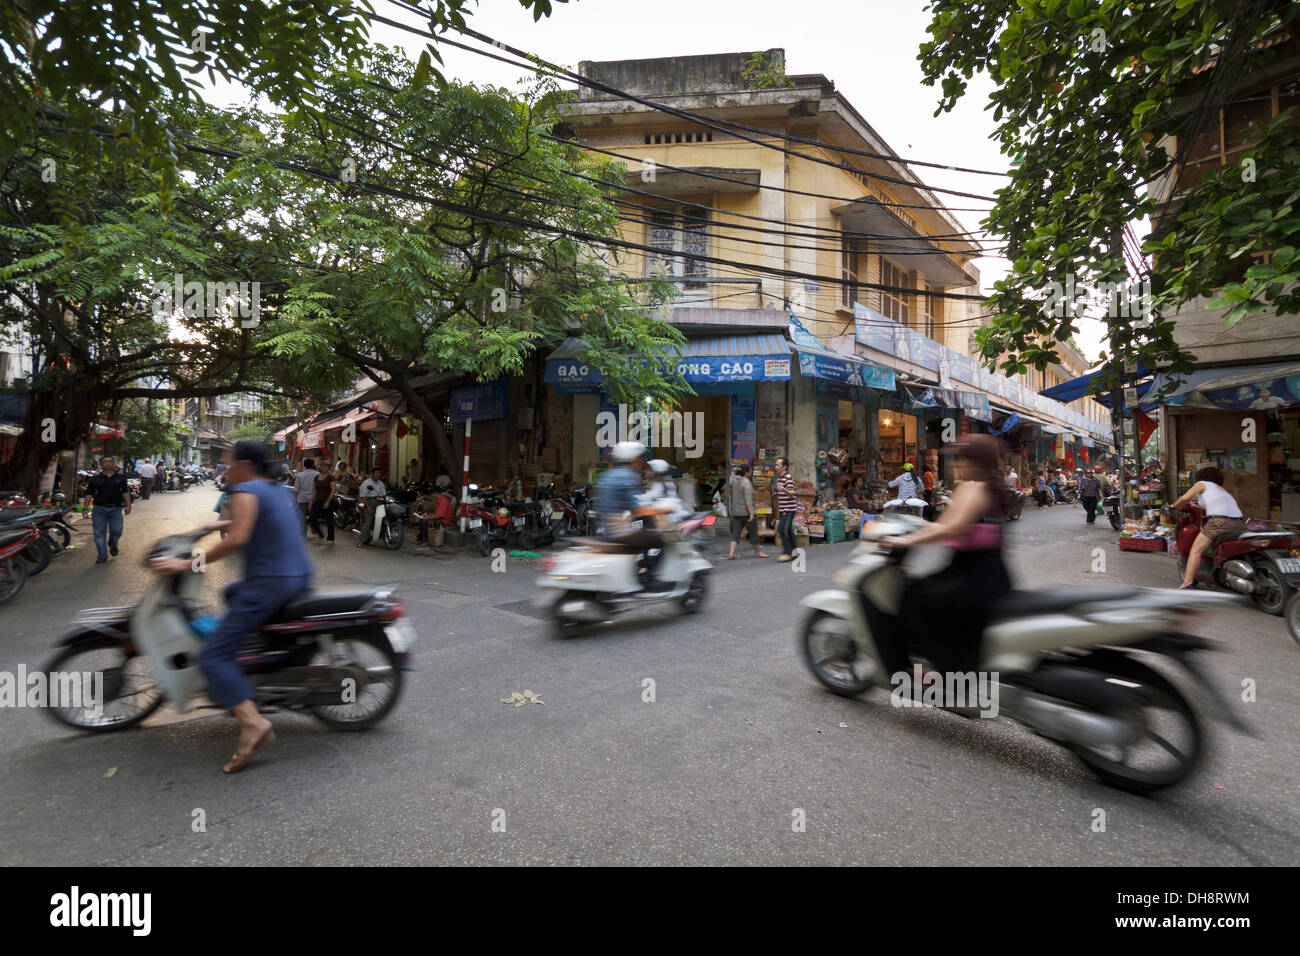 Shot of many scooter and mopeds in the Old Quarter of Hanoi, longer exposure captures motion of scooters. Stock Photo